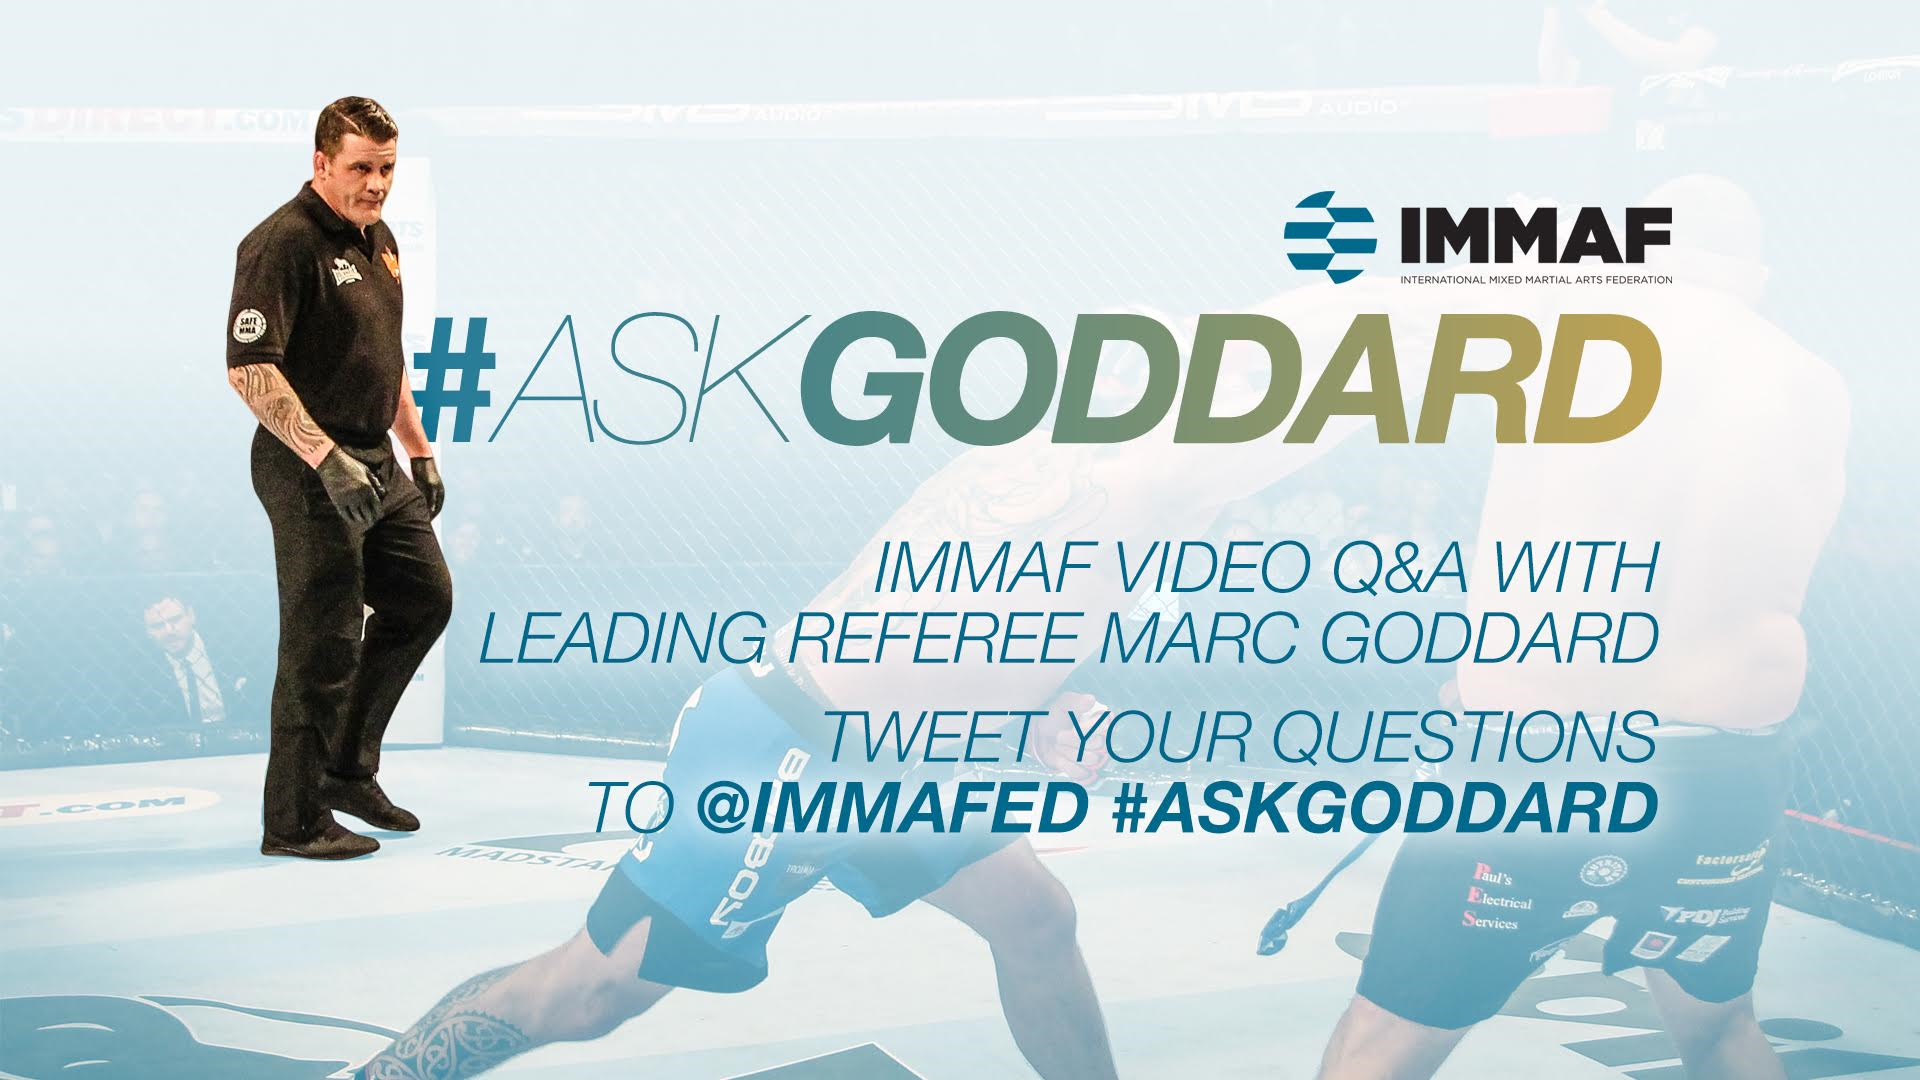 #AskGoddard: IMMAF certification courses for referees and judges